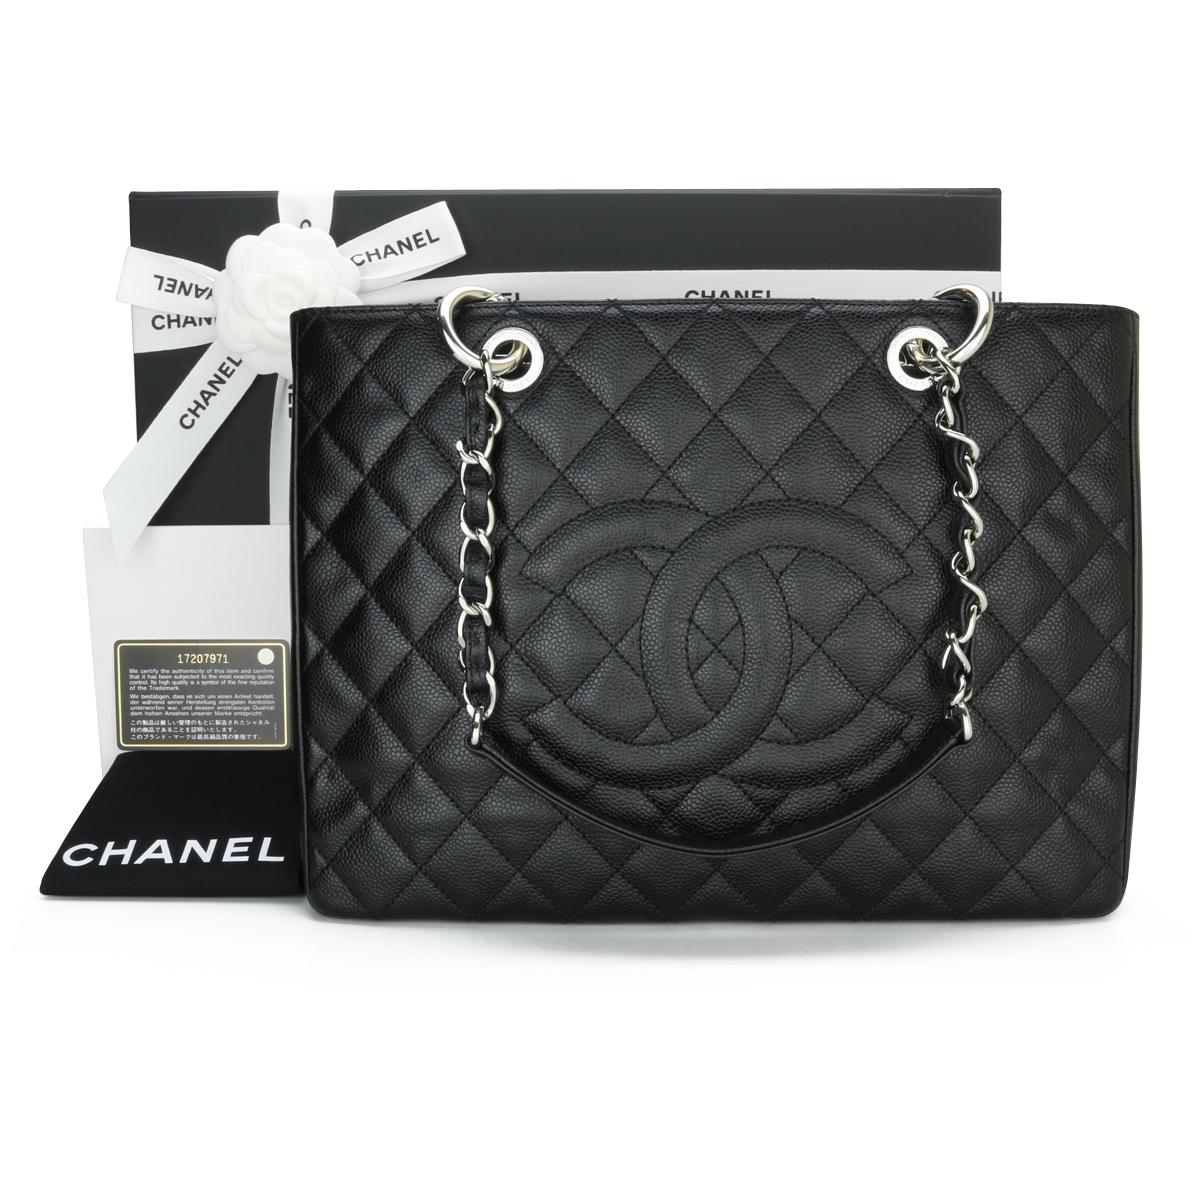 CHANEL Grand Shopping Tote (GST) Black Caviar with Silver Hardware 2013.

This bag is in excellent condition, the bag still holds its original shape, and the hardware is still very shiny.

As Chanel has discontinued the Grand Shopping Tote (GST), it